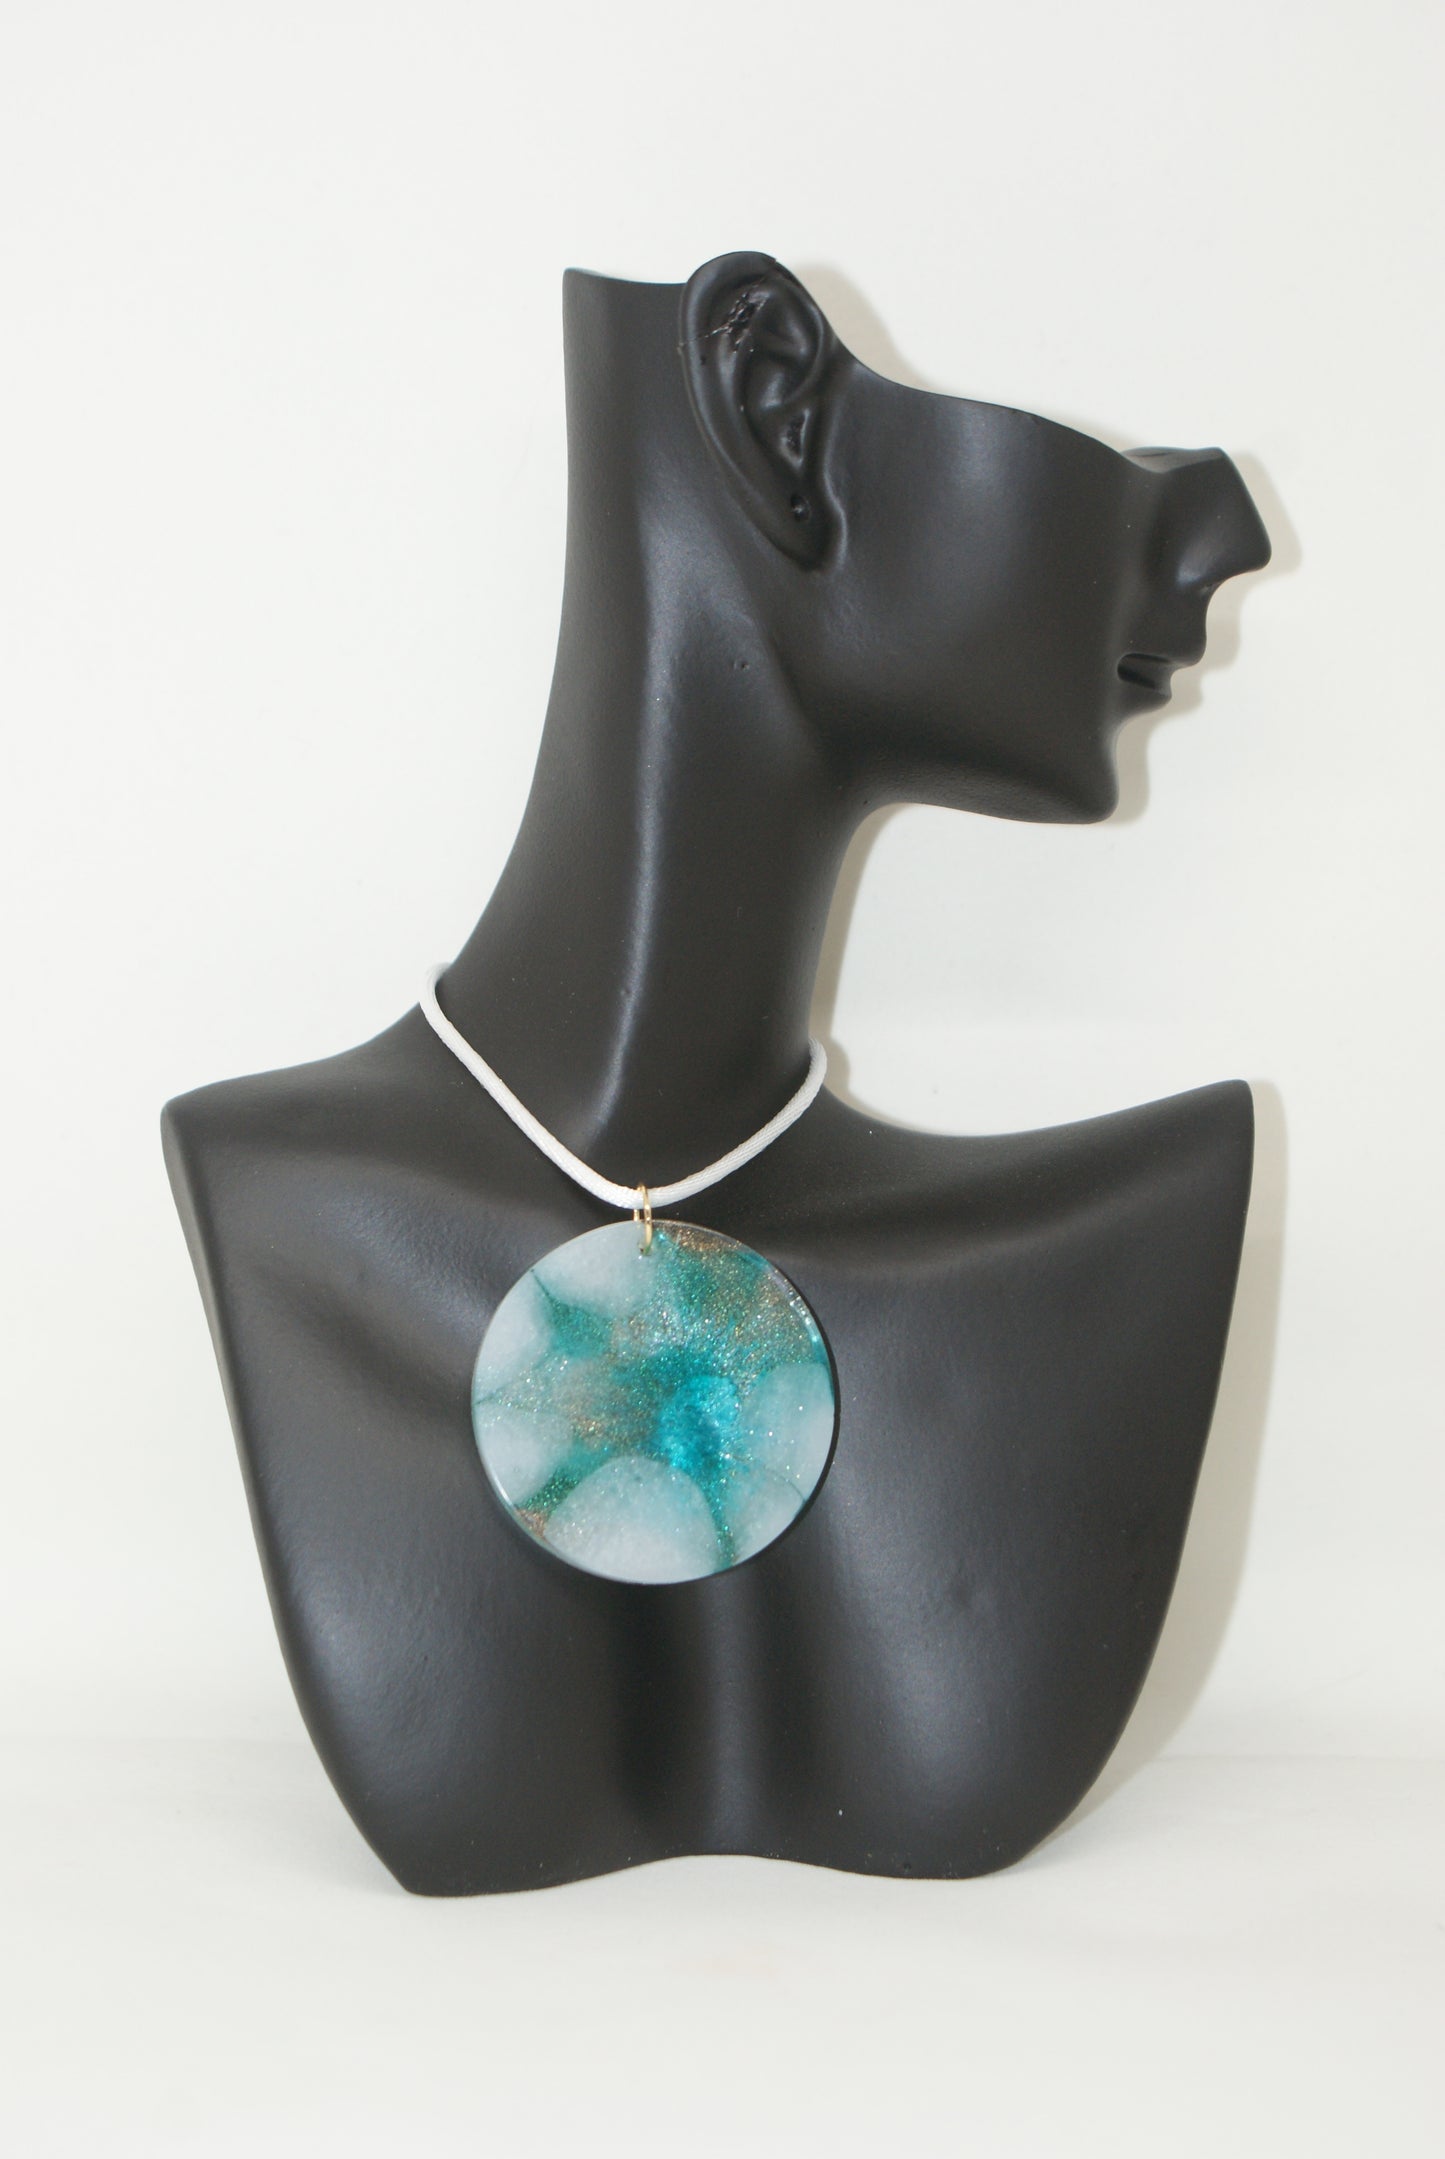 Hand-Poured Resin and Alcohol Ink Necklace - Circle - Turquoise/White